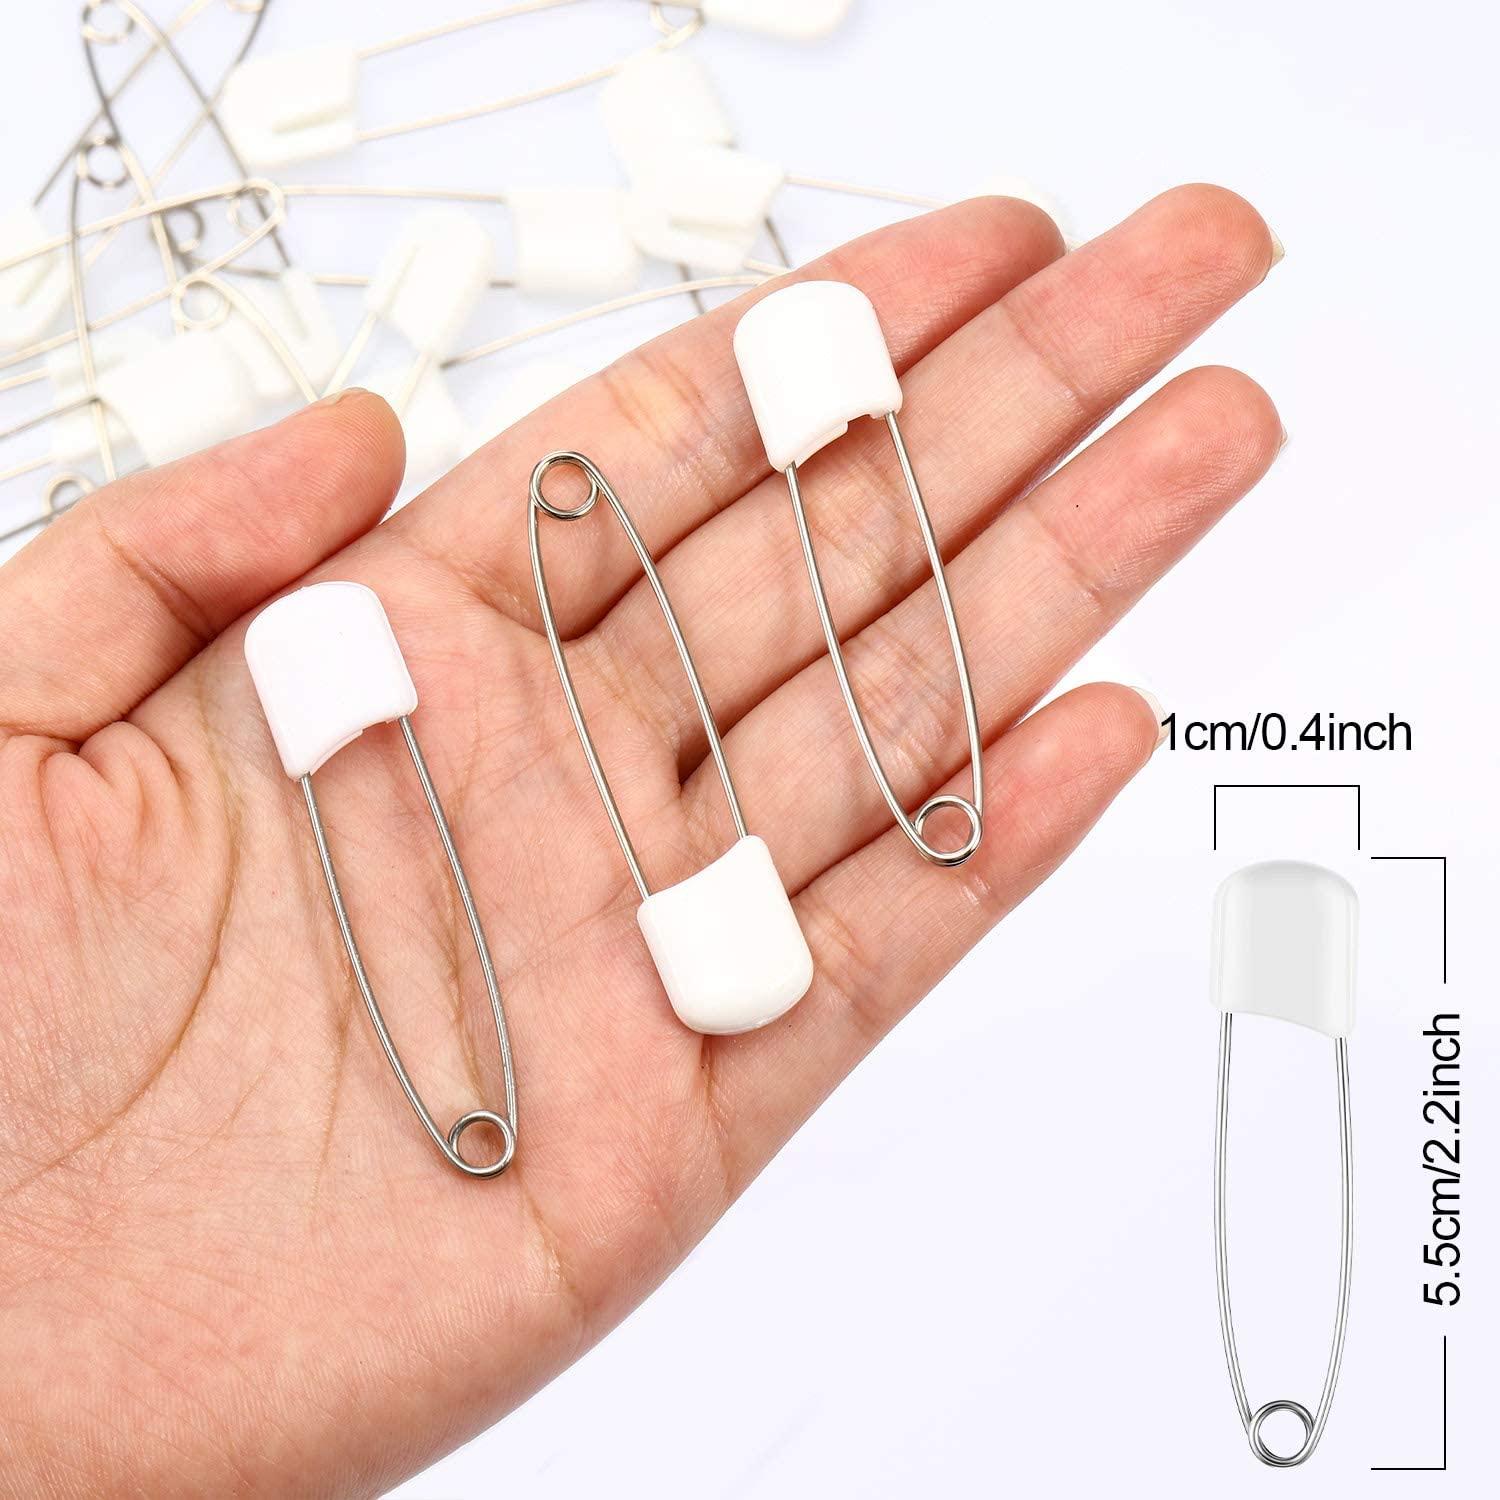 50 Pcs Diaper Pins, Plastic Head Safety Pin with Safe Locking